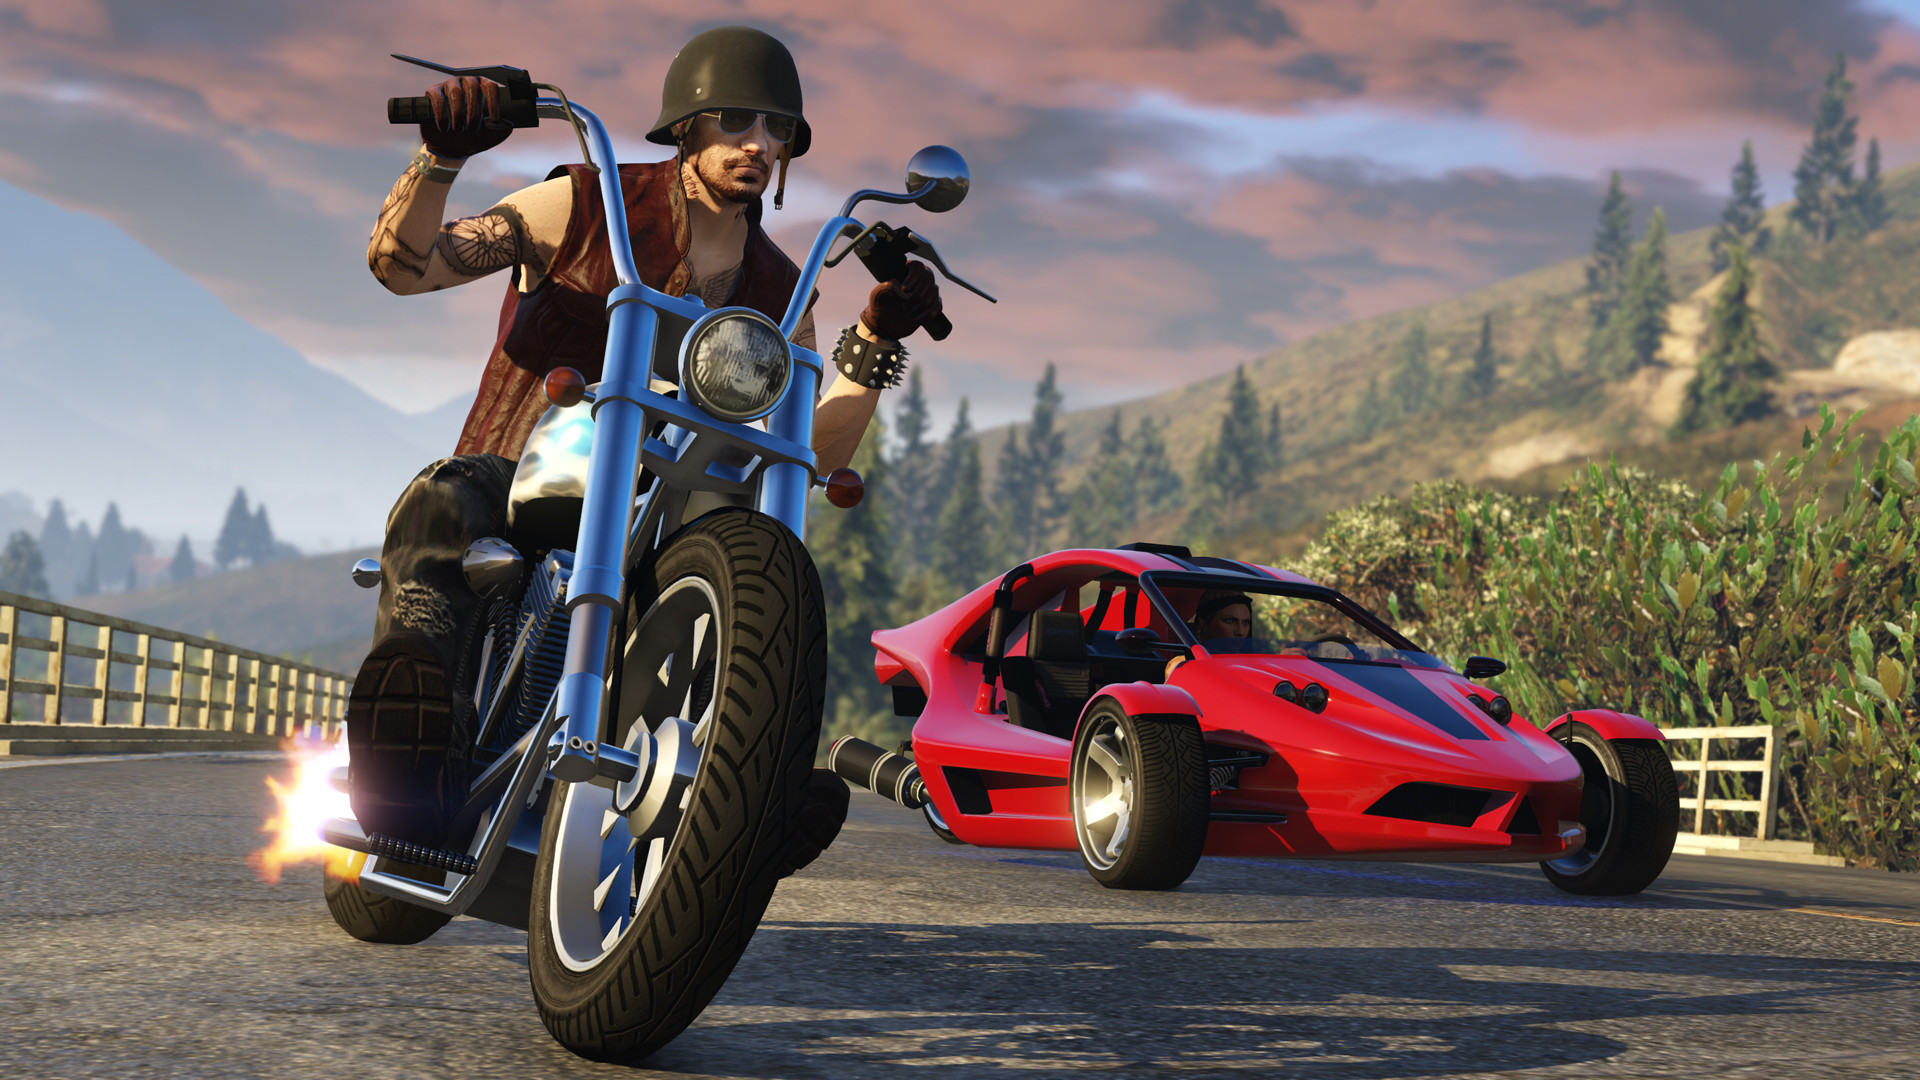 1920x1080 GTA Online: Bikers Update - Two New Vehicles and Sixth Purchasable Property  Now Available